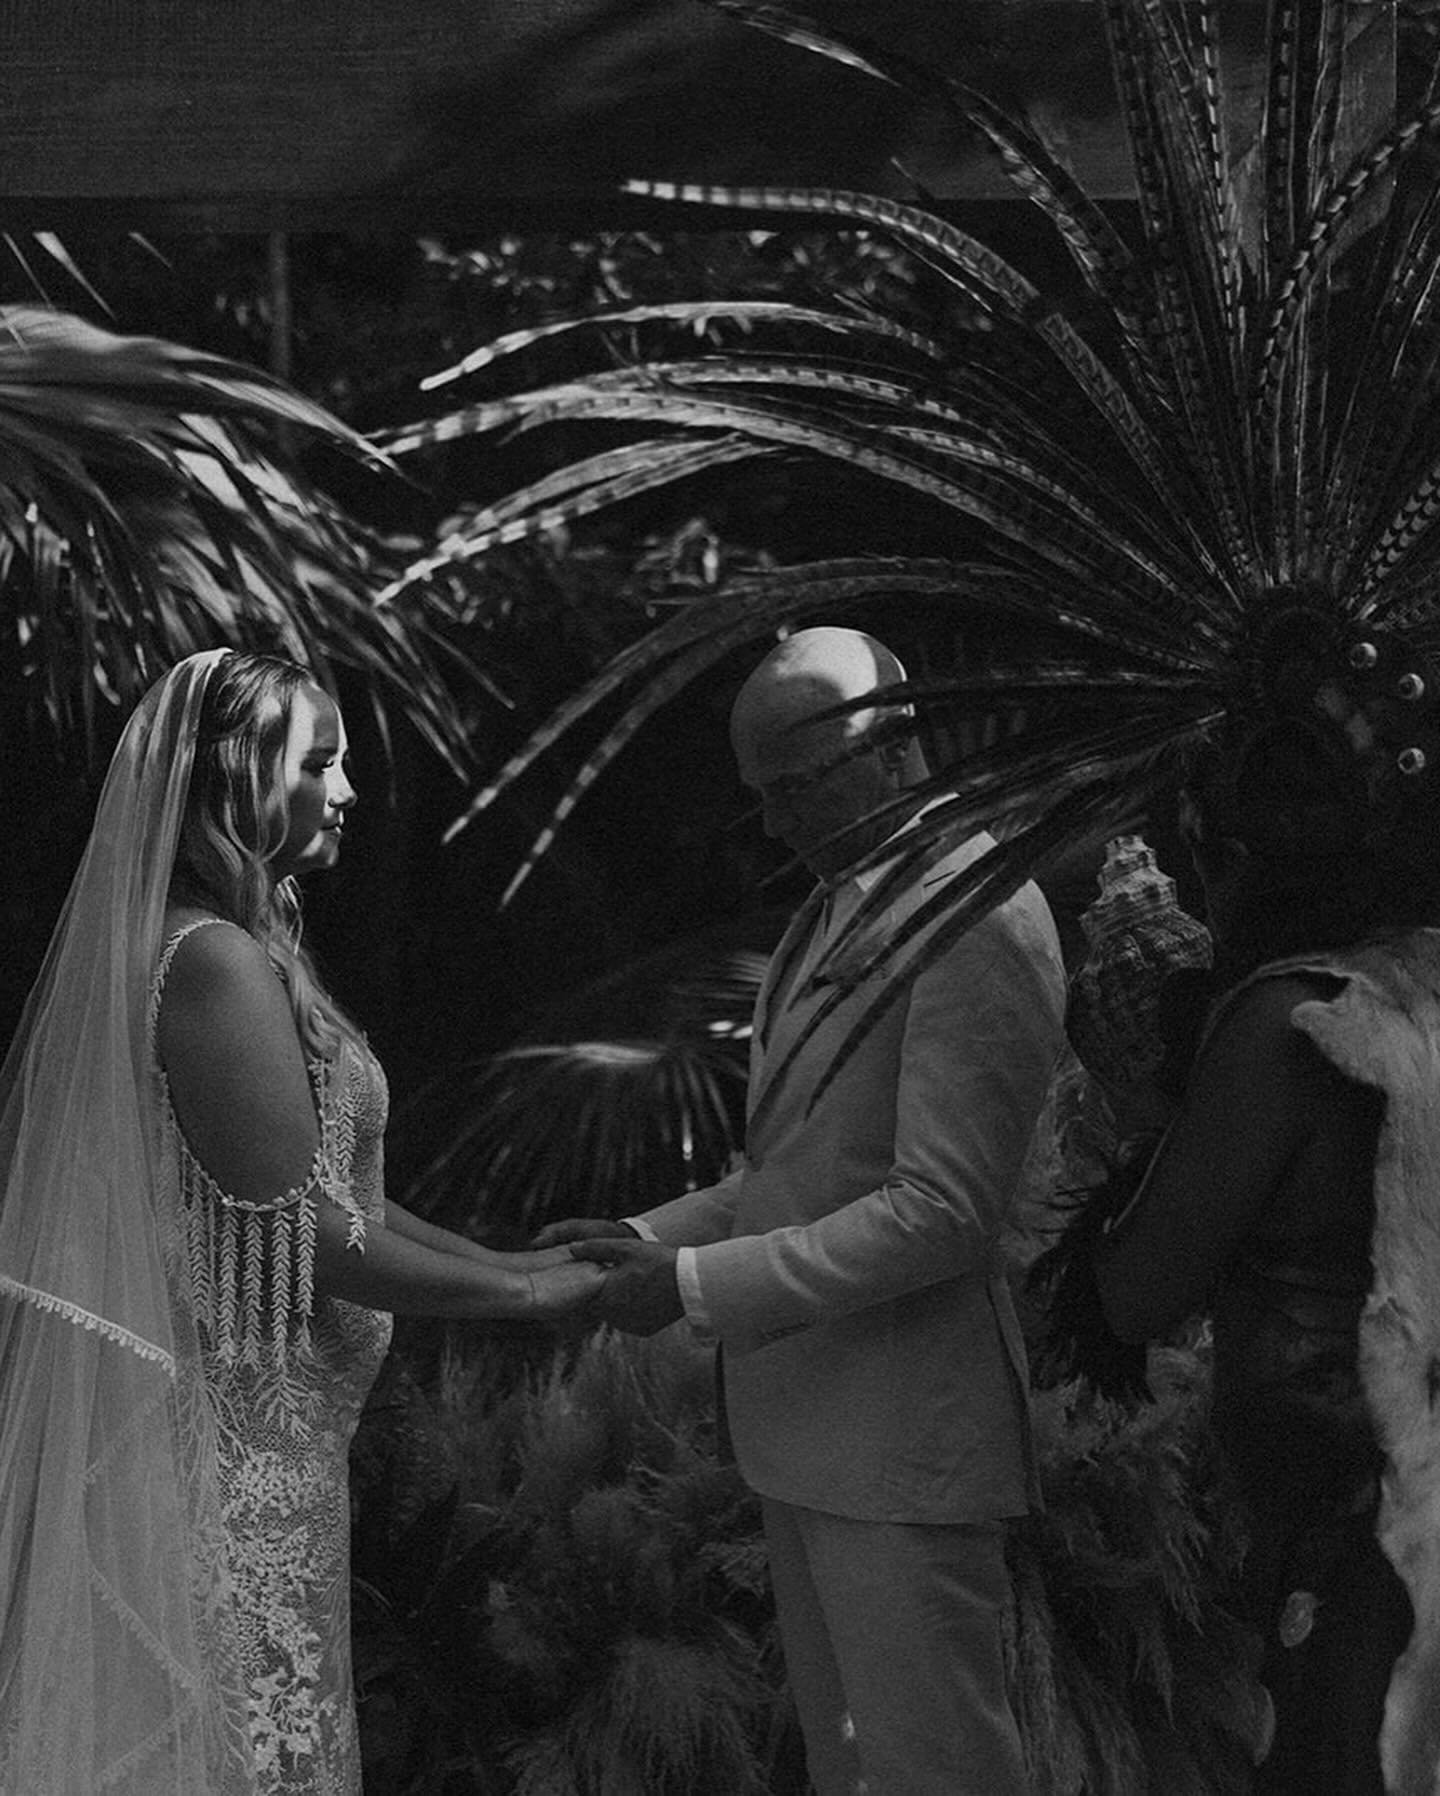 The Serurs, their Mayan ceremony and their intimate reception. 

This week is yours. Happy 1st anniversary &hearts;️

Photo: @andregouinphoto | Floral designer: @marialimon_ | Loc.: @kimatulum | Shaman: @_mexica._arte_ | Glam: @preptulum @karinapro_g